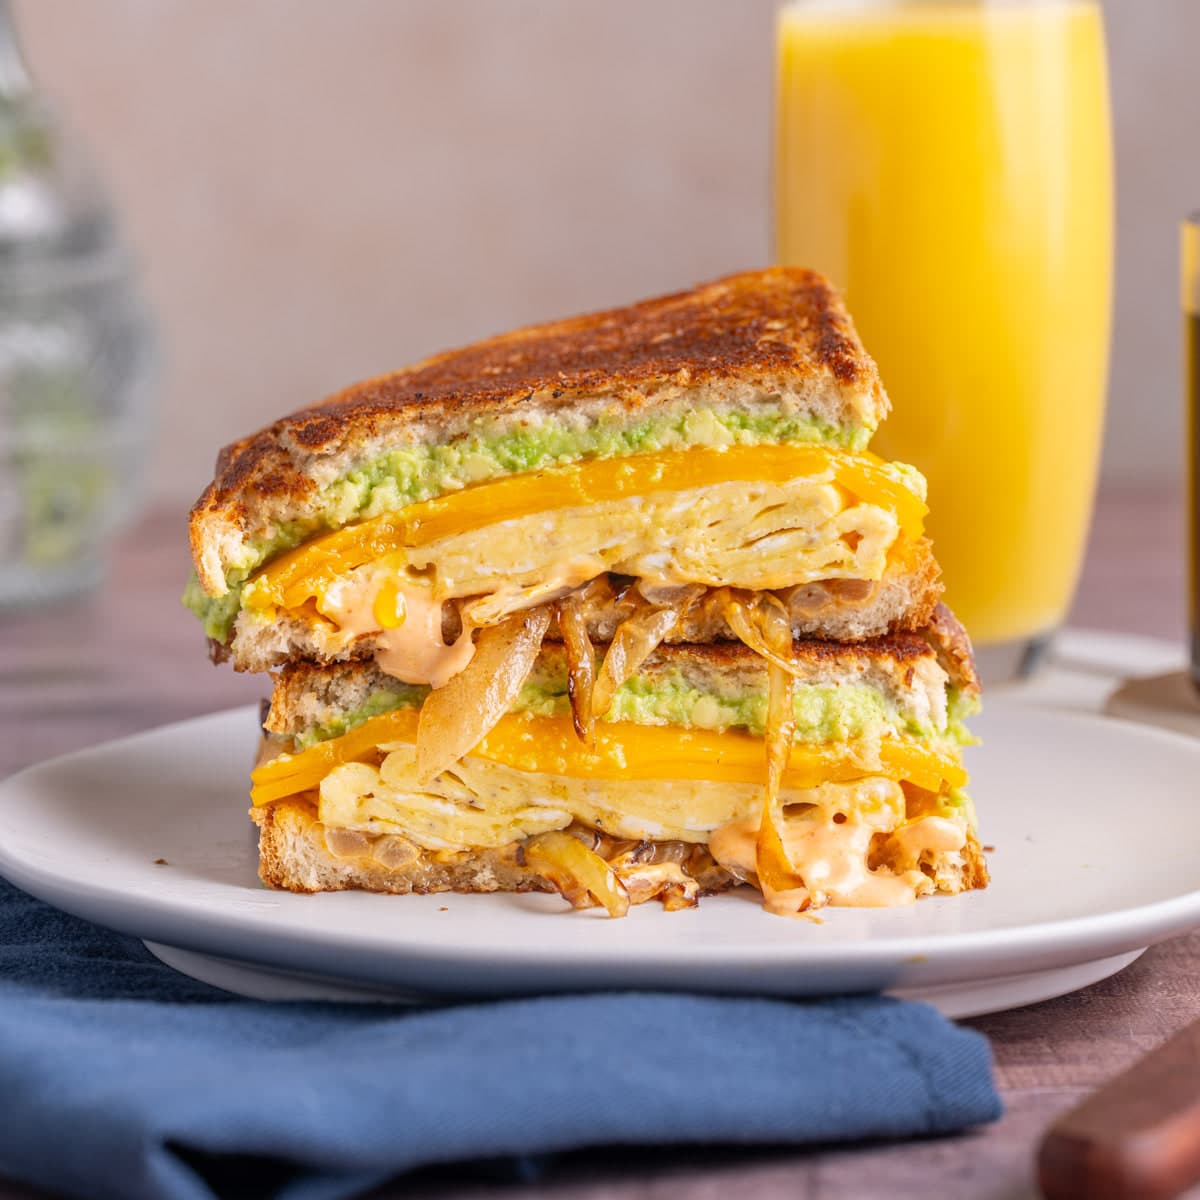 Epic breakfast sandwich sliced in half and stacked on a plate.